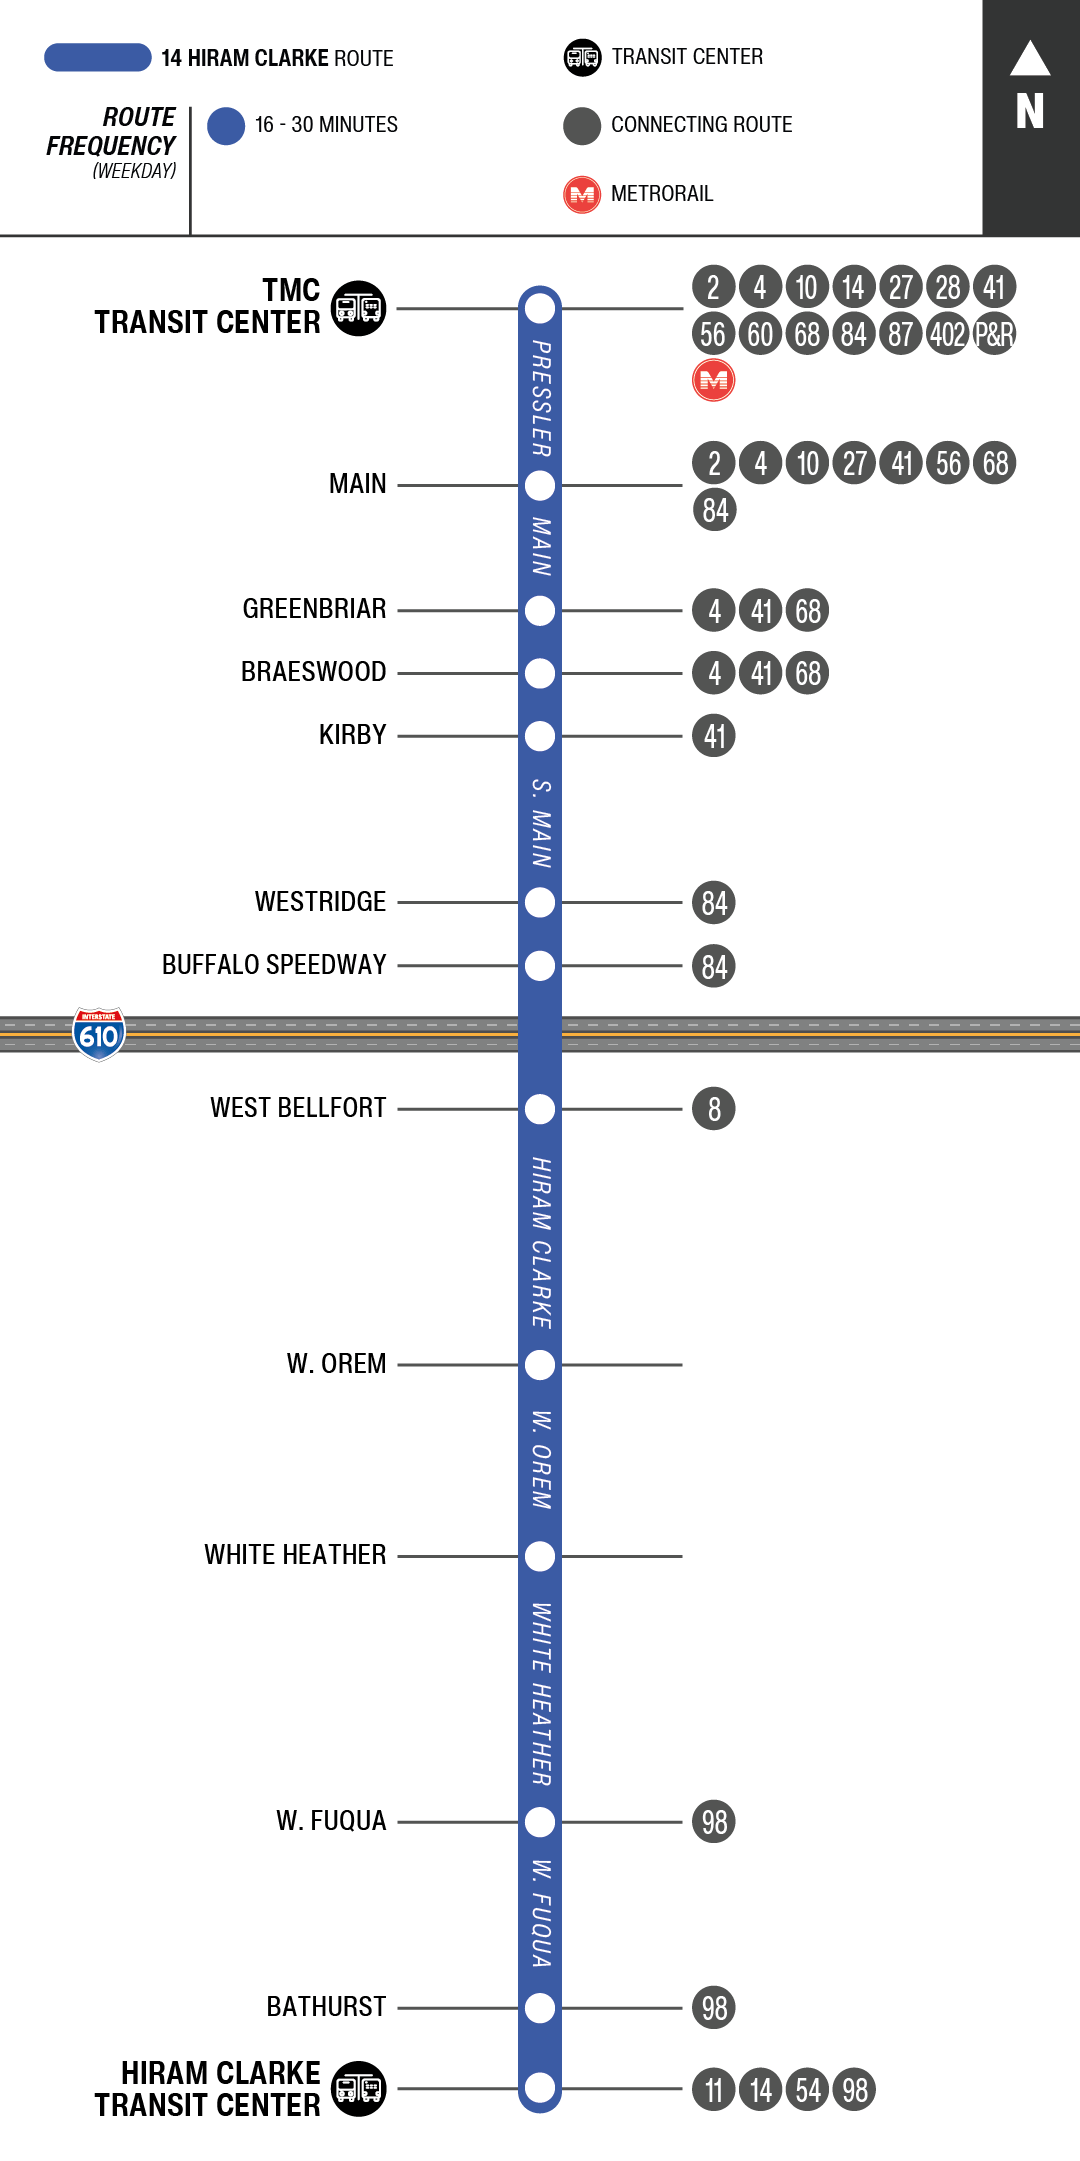 Route map for 14 Hiram Clarke bus